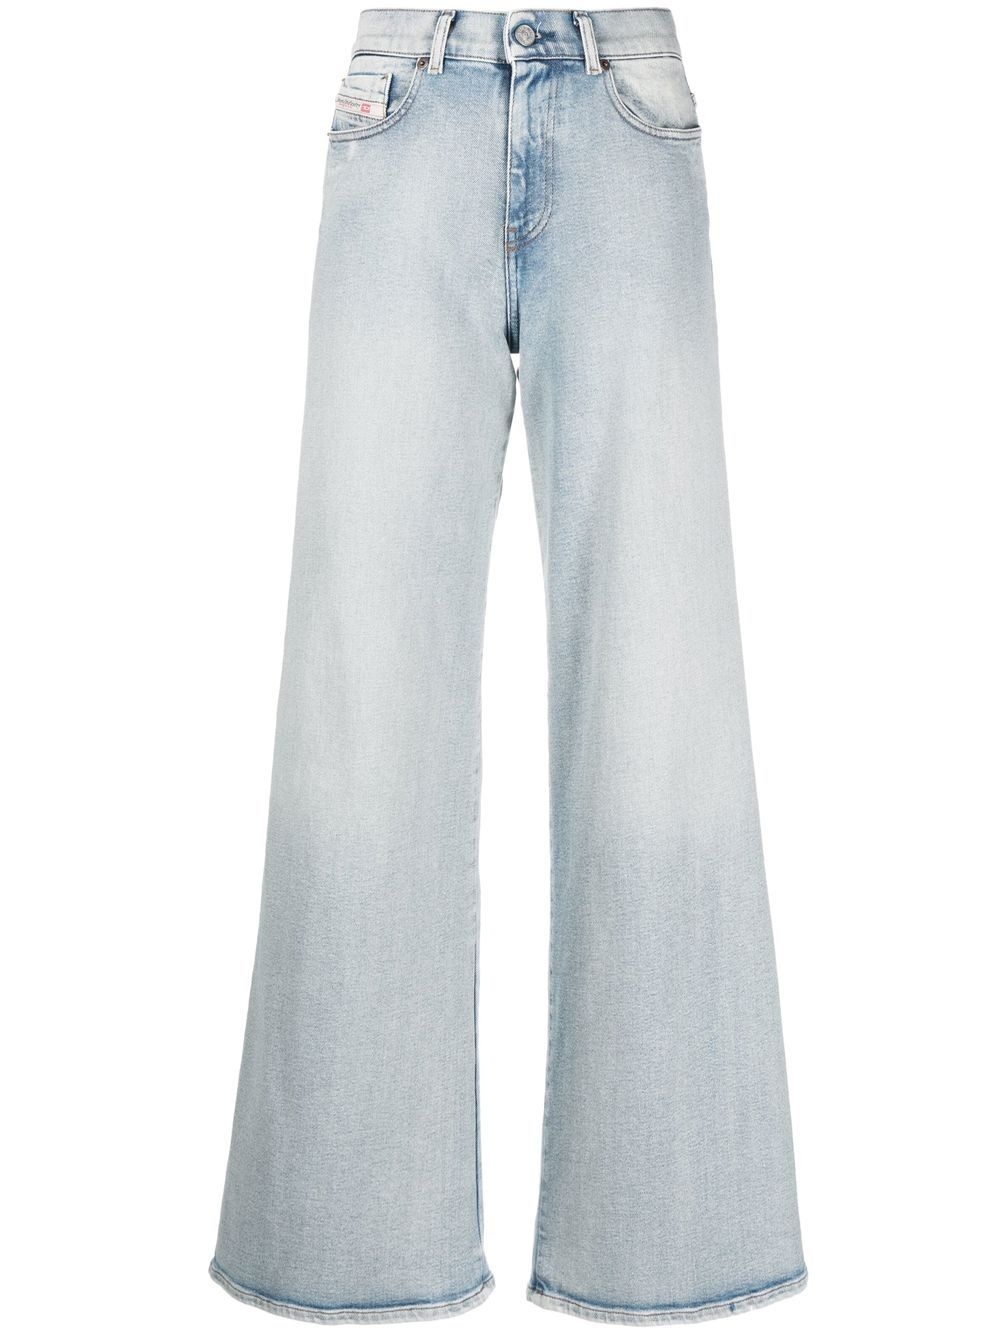 1978 flared wide-leg jeans - 1